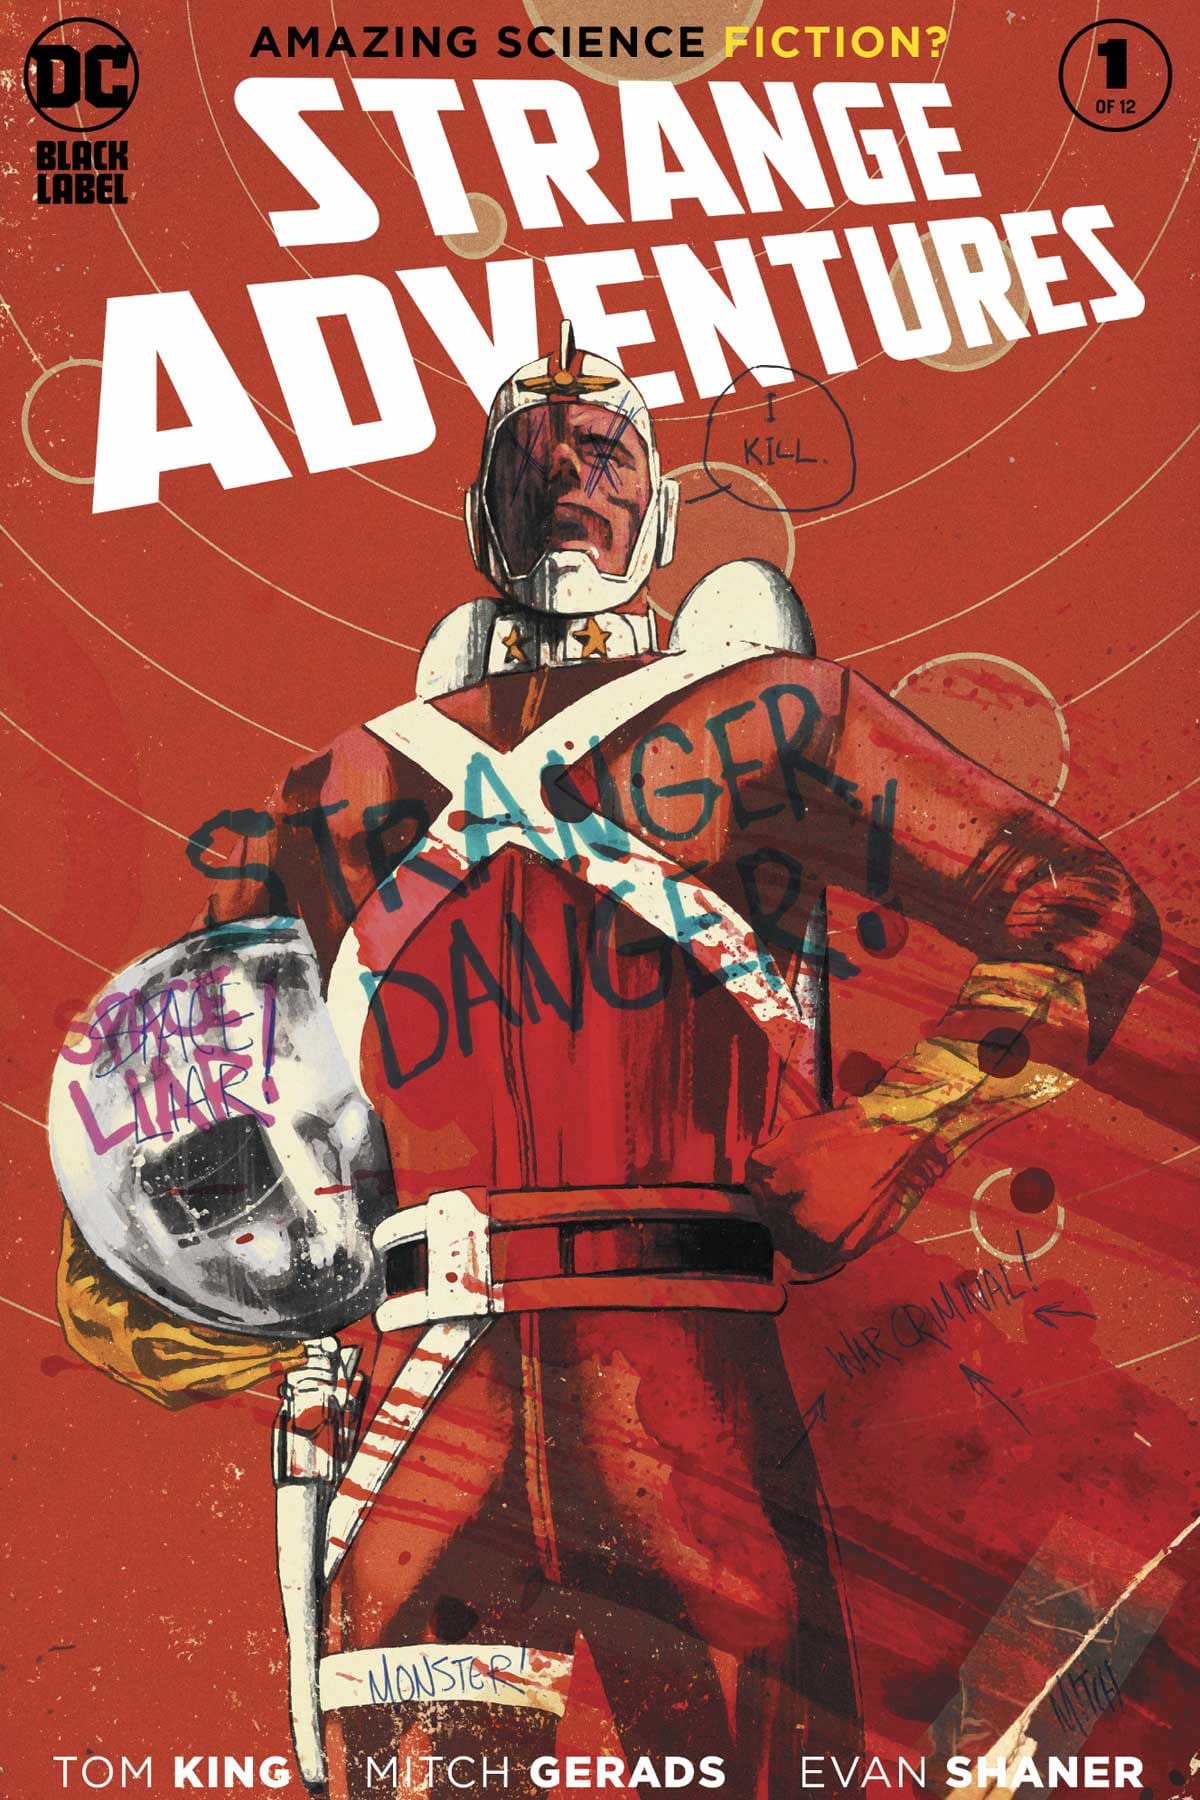 REVIEW: Strange Adventures #1 -- "Schroedinger's Storyline, Leaving Only Apprehension At Every Turn Of The Page"